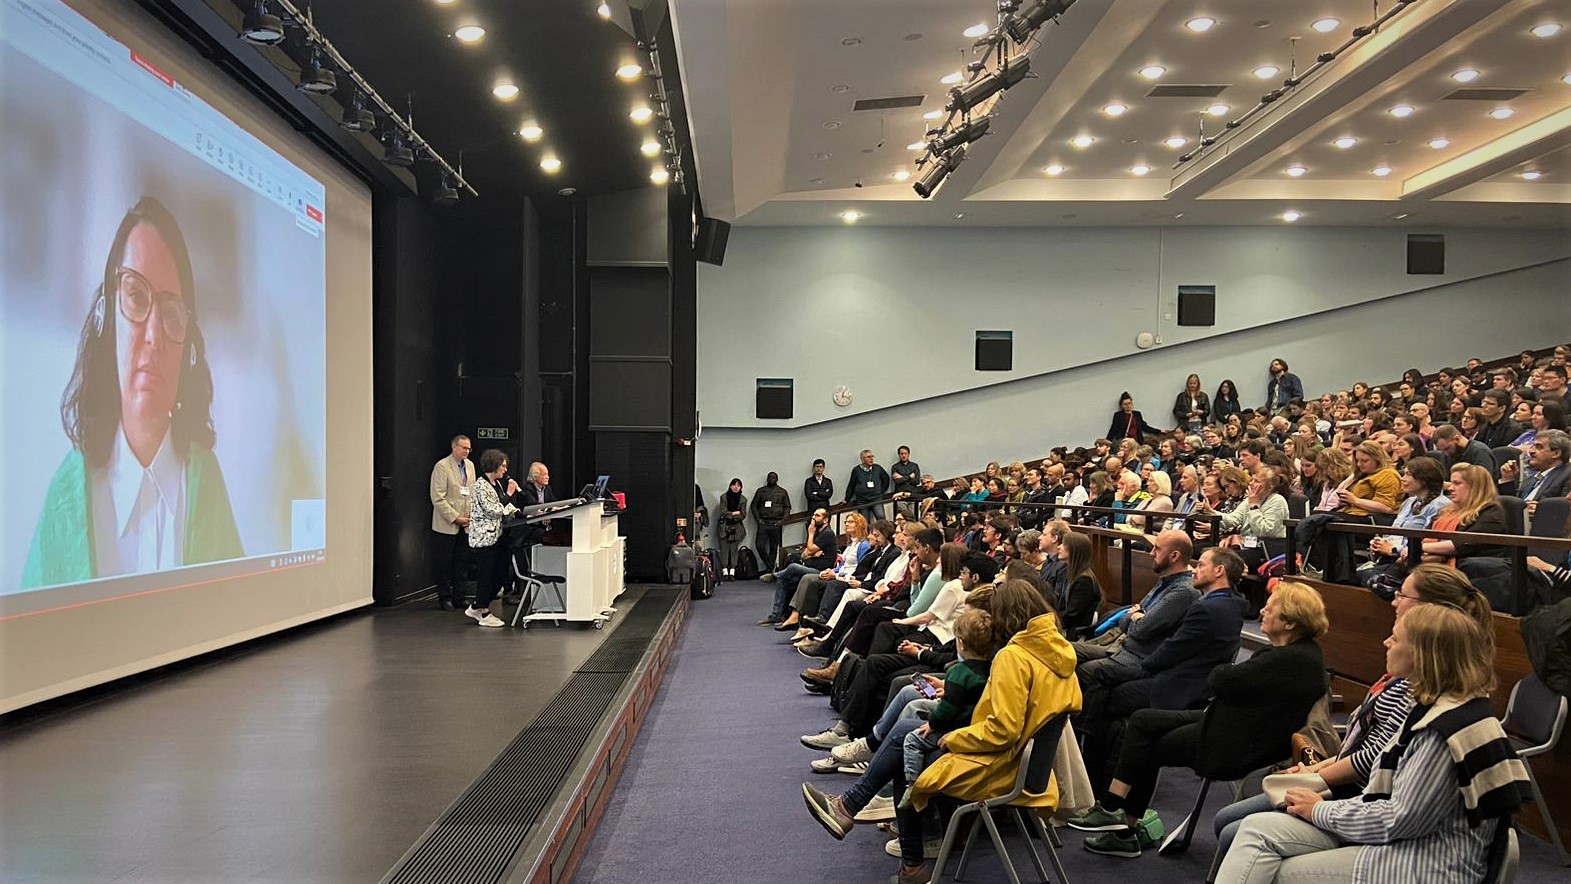 Auditorium with a full audience. Dr. Vono de Vilhena is shown on screen